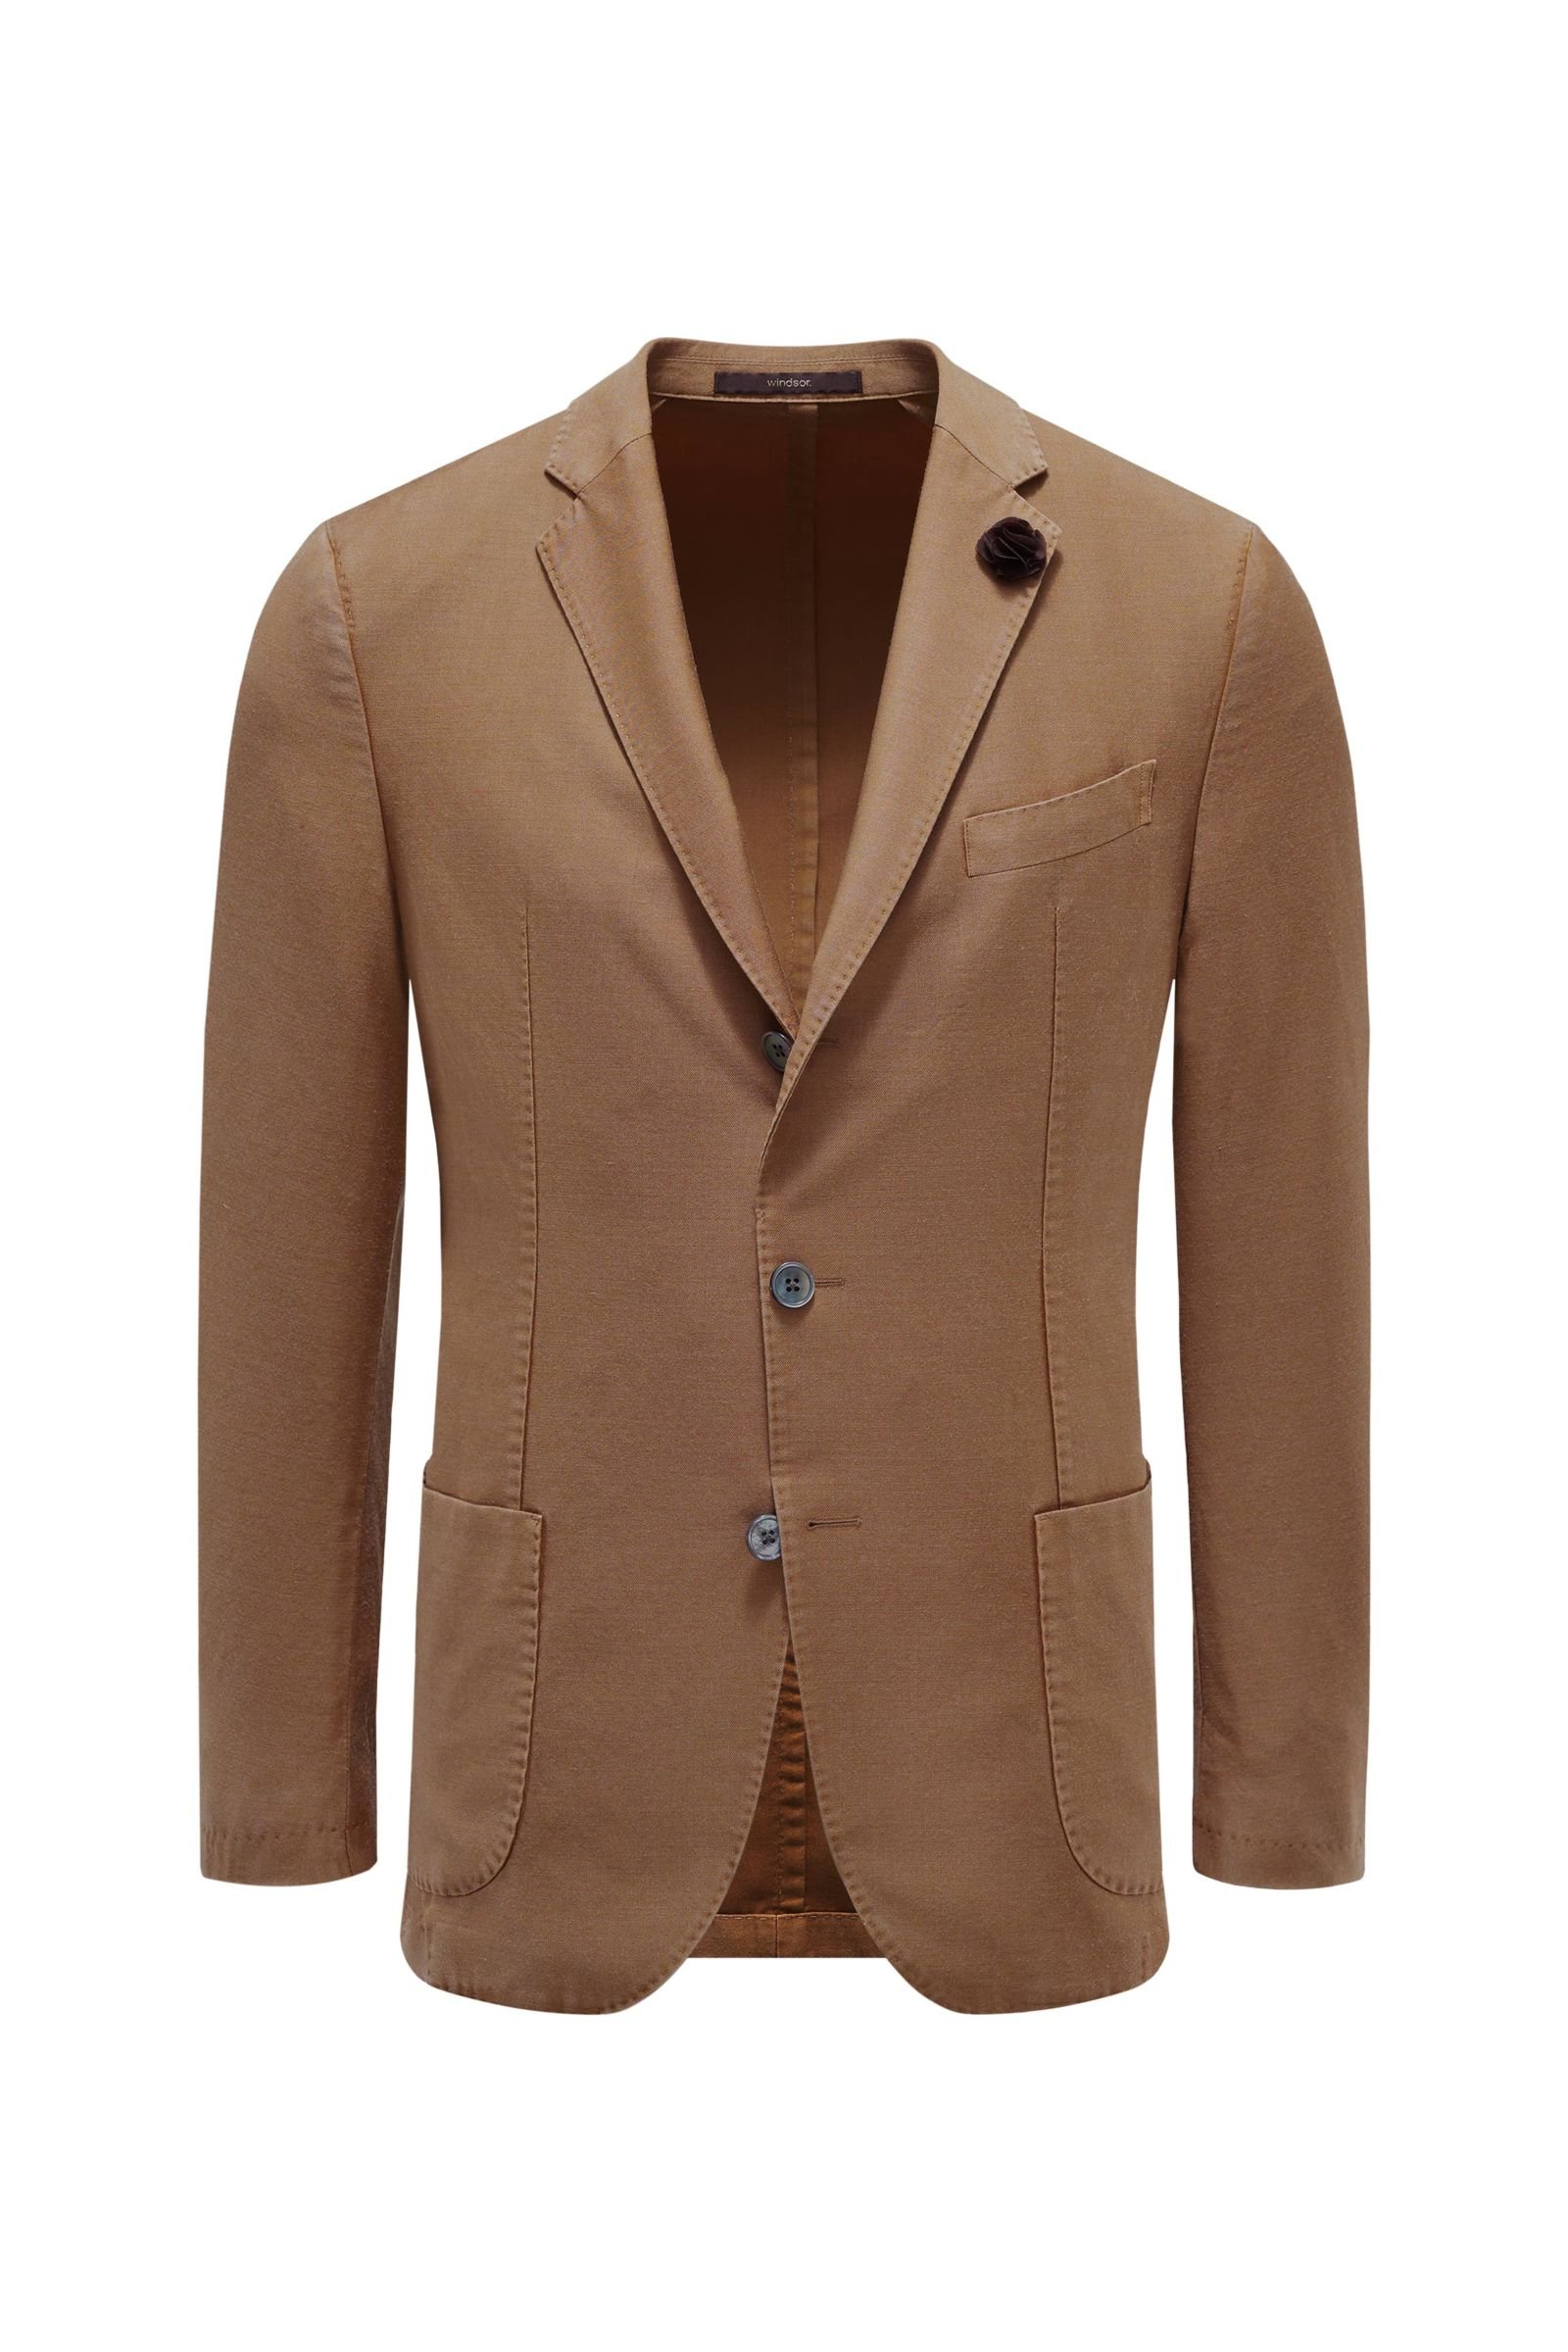 Smart-casual jacket 'Camicia' light brown